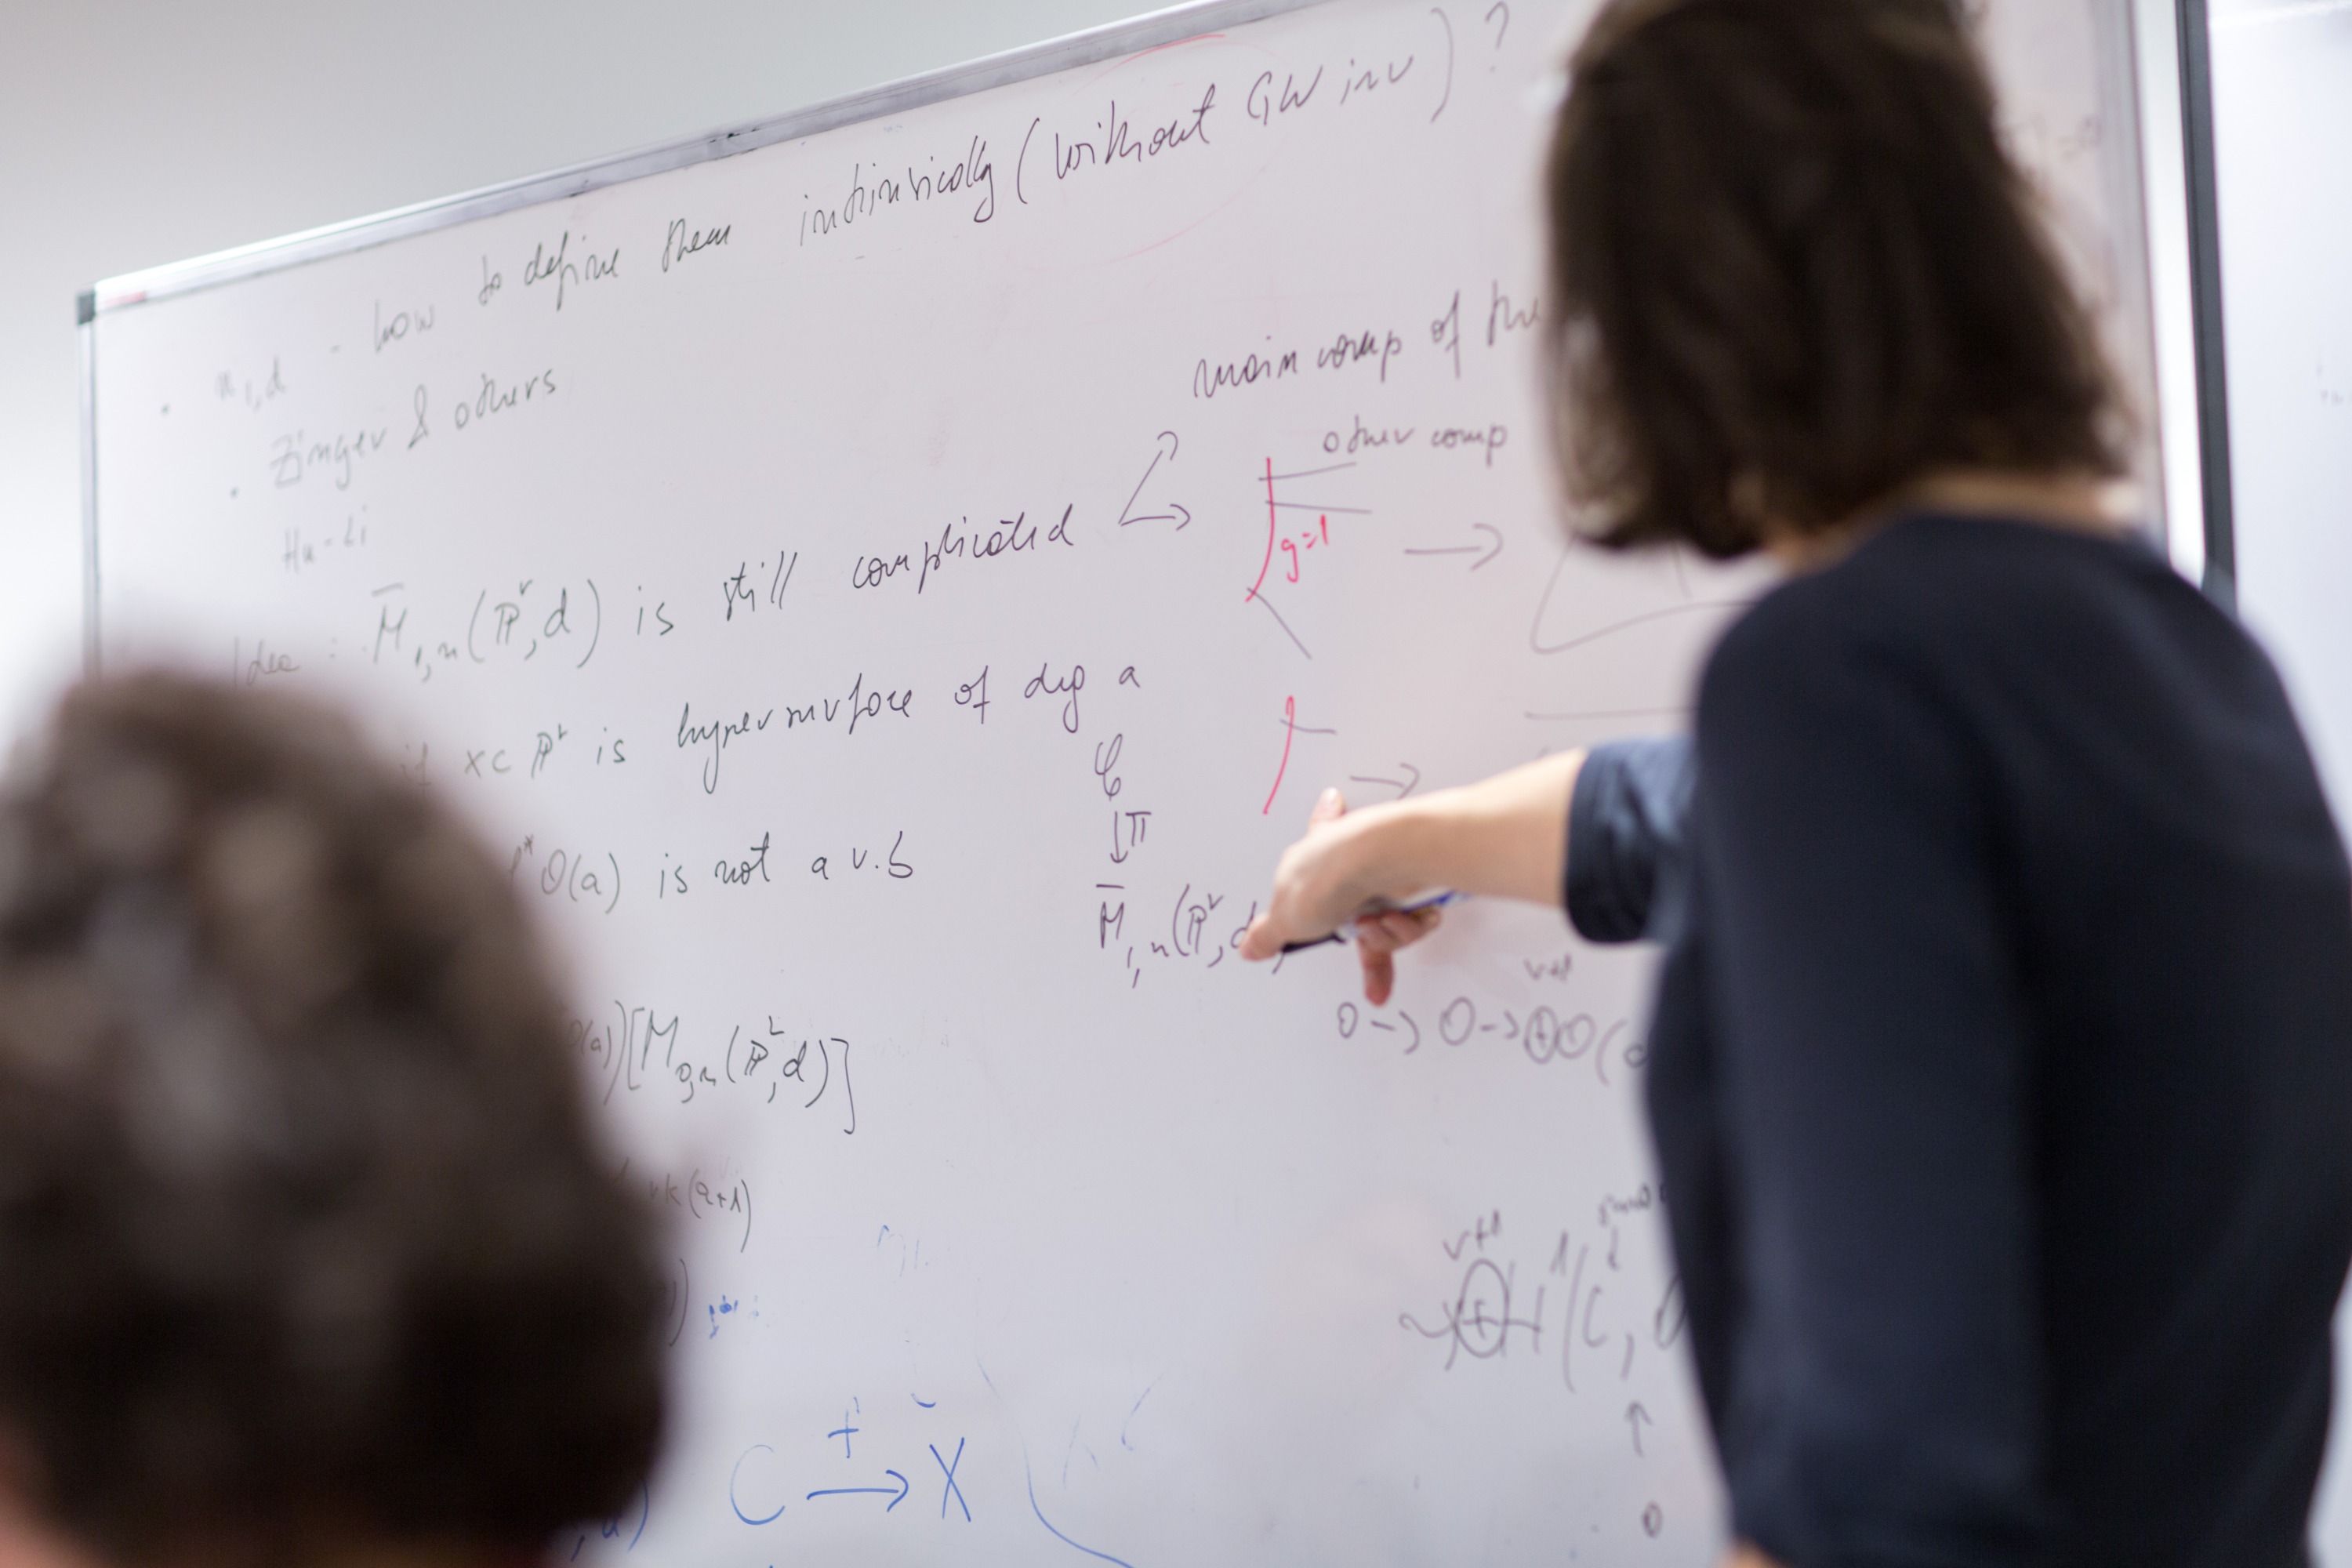 Staff pointing at mathematics on a writing board